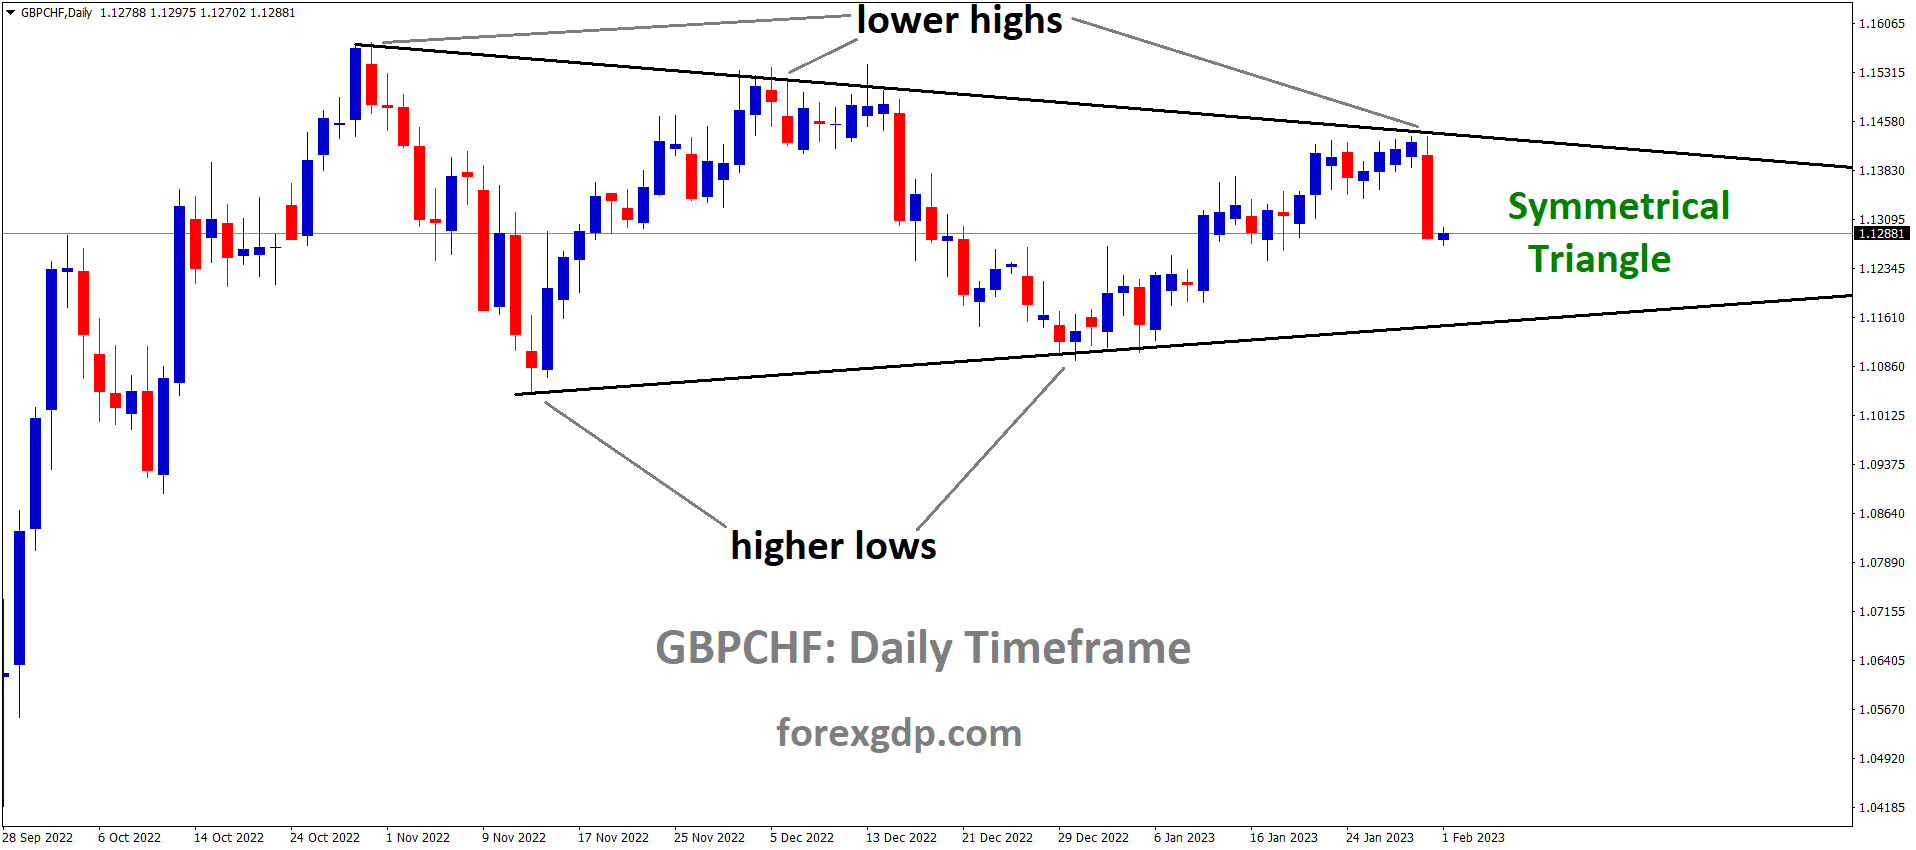 GBPCHF is moving in the symmetrical triangle pattern and the market has fallen from the top area of the pattern